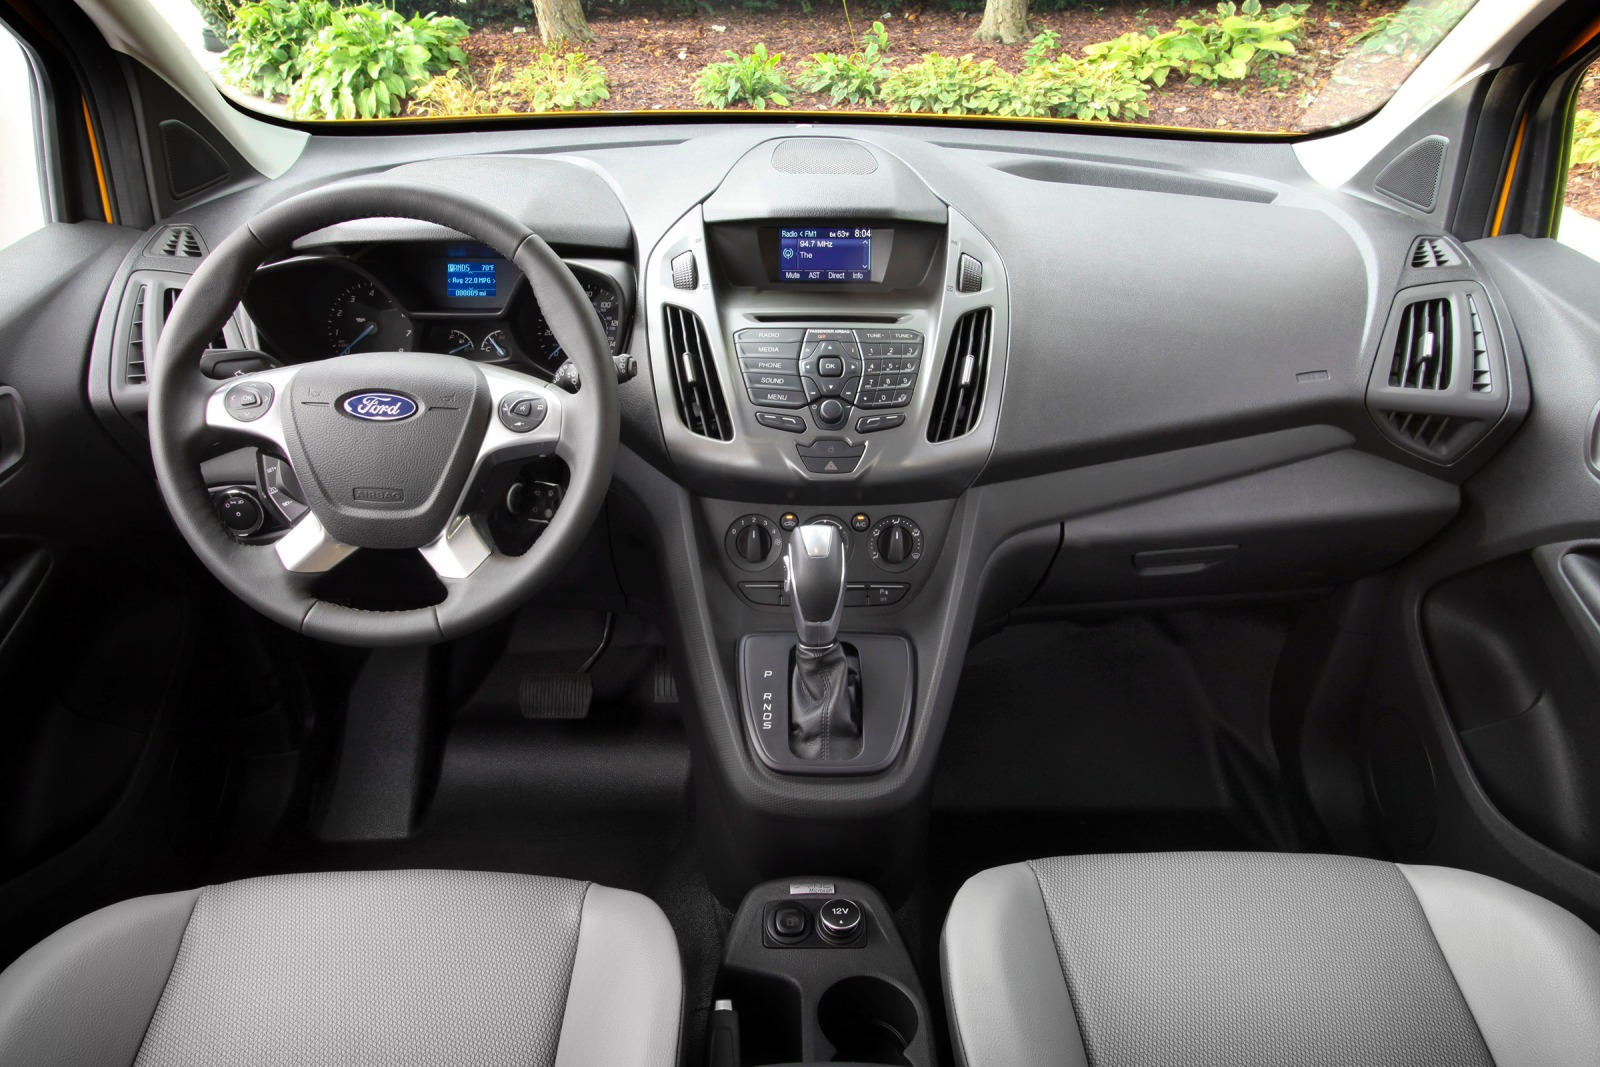 2017 Ford Transit Connect Cargo Van Dashboard